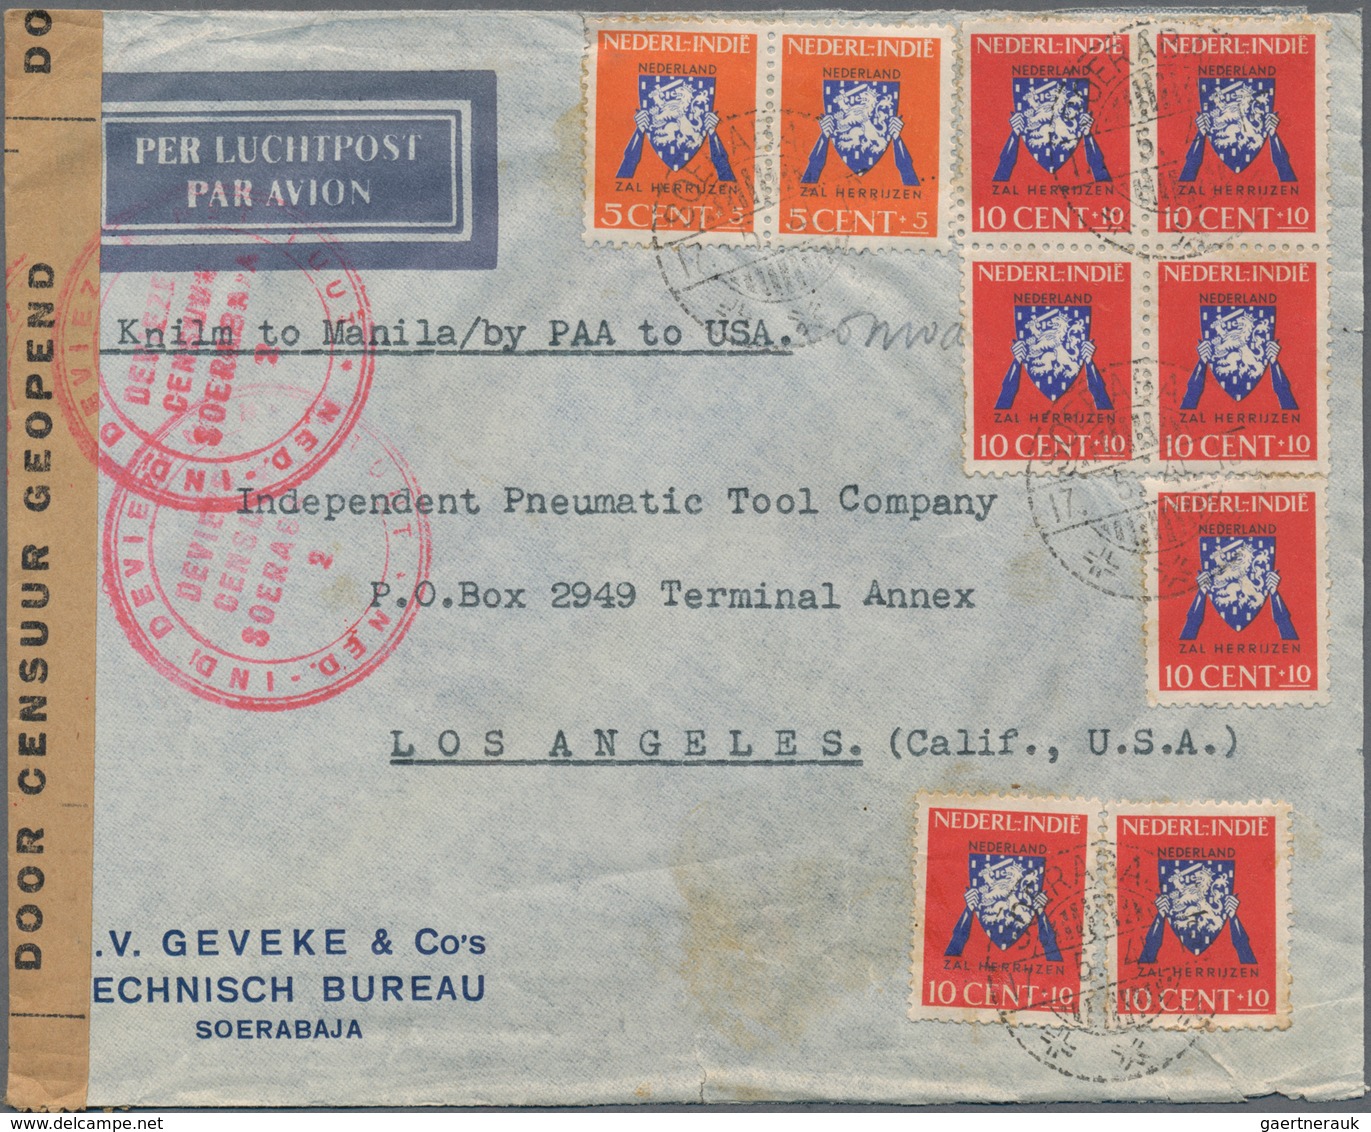 Niederländisch-Indien: 1880/1950 ca., comprehensive lot of ca.270 covers, cards and stationeries, co